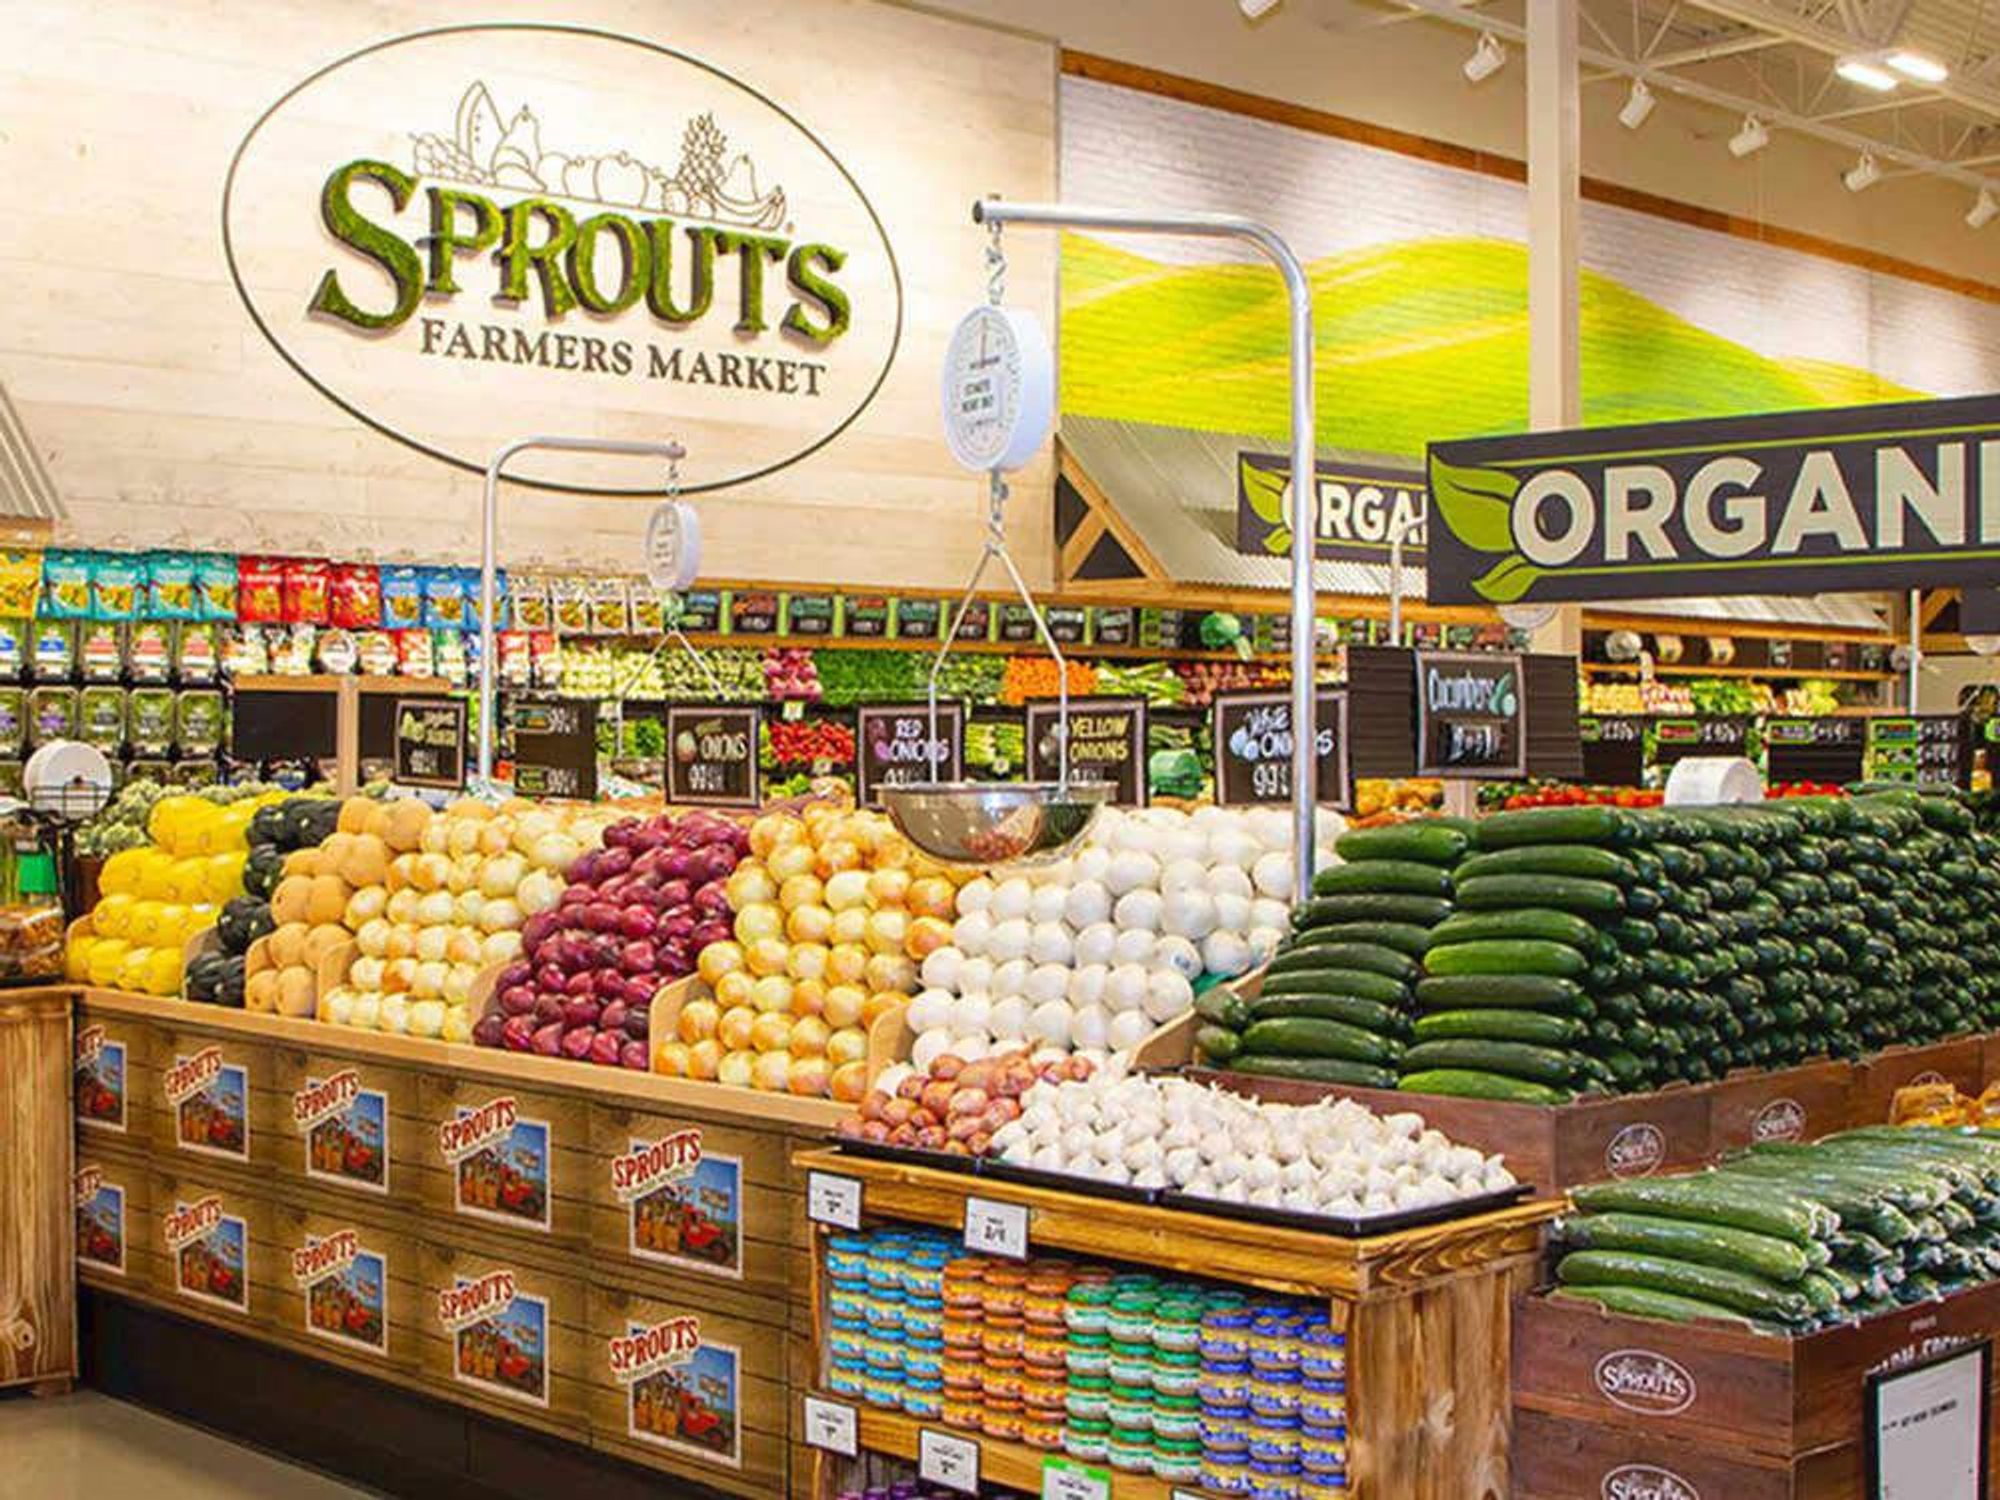 Sprouts grocery store farmers market produce section